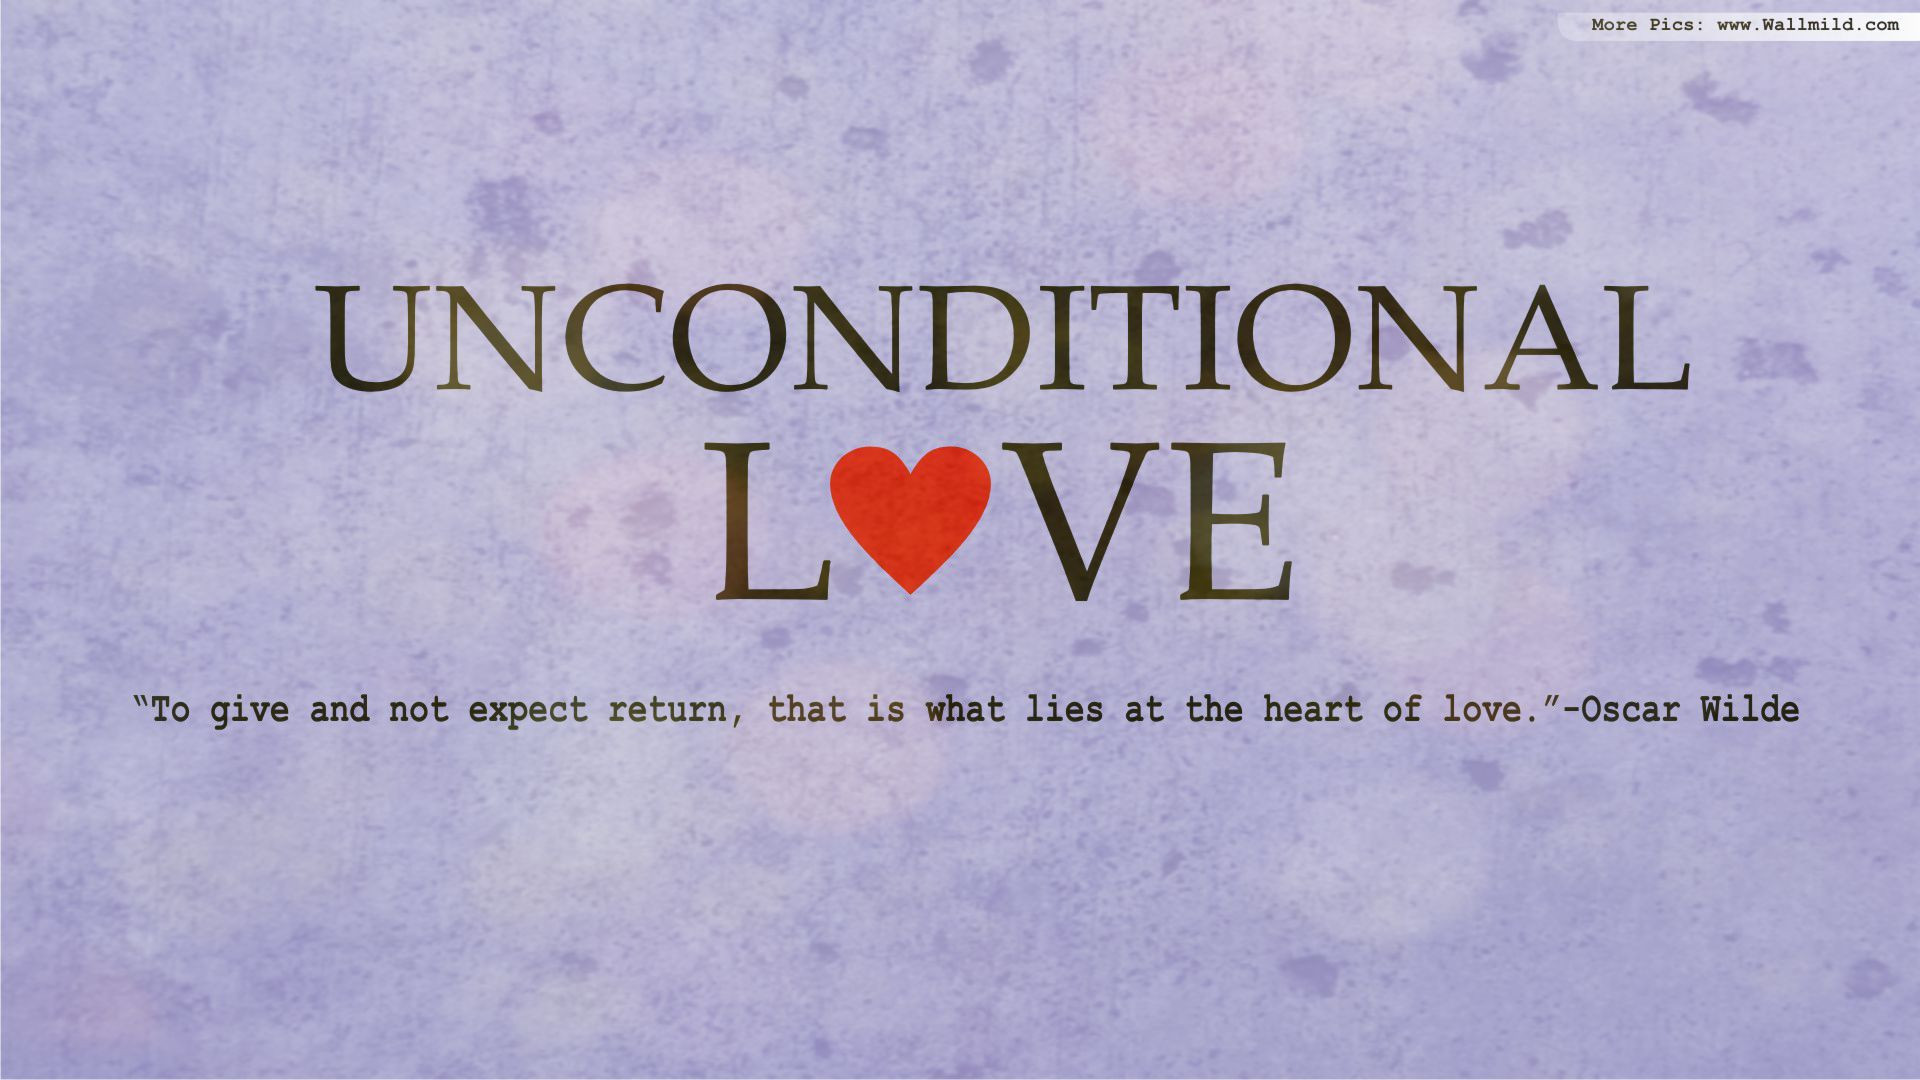 Quote Unconditional Love
 February 2014